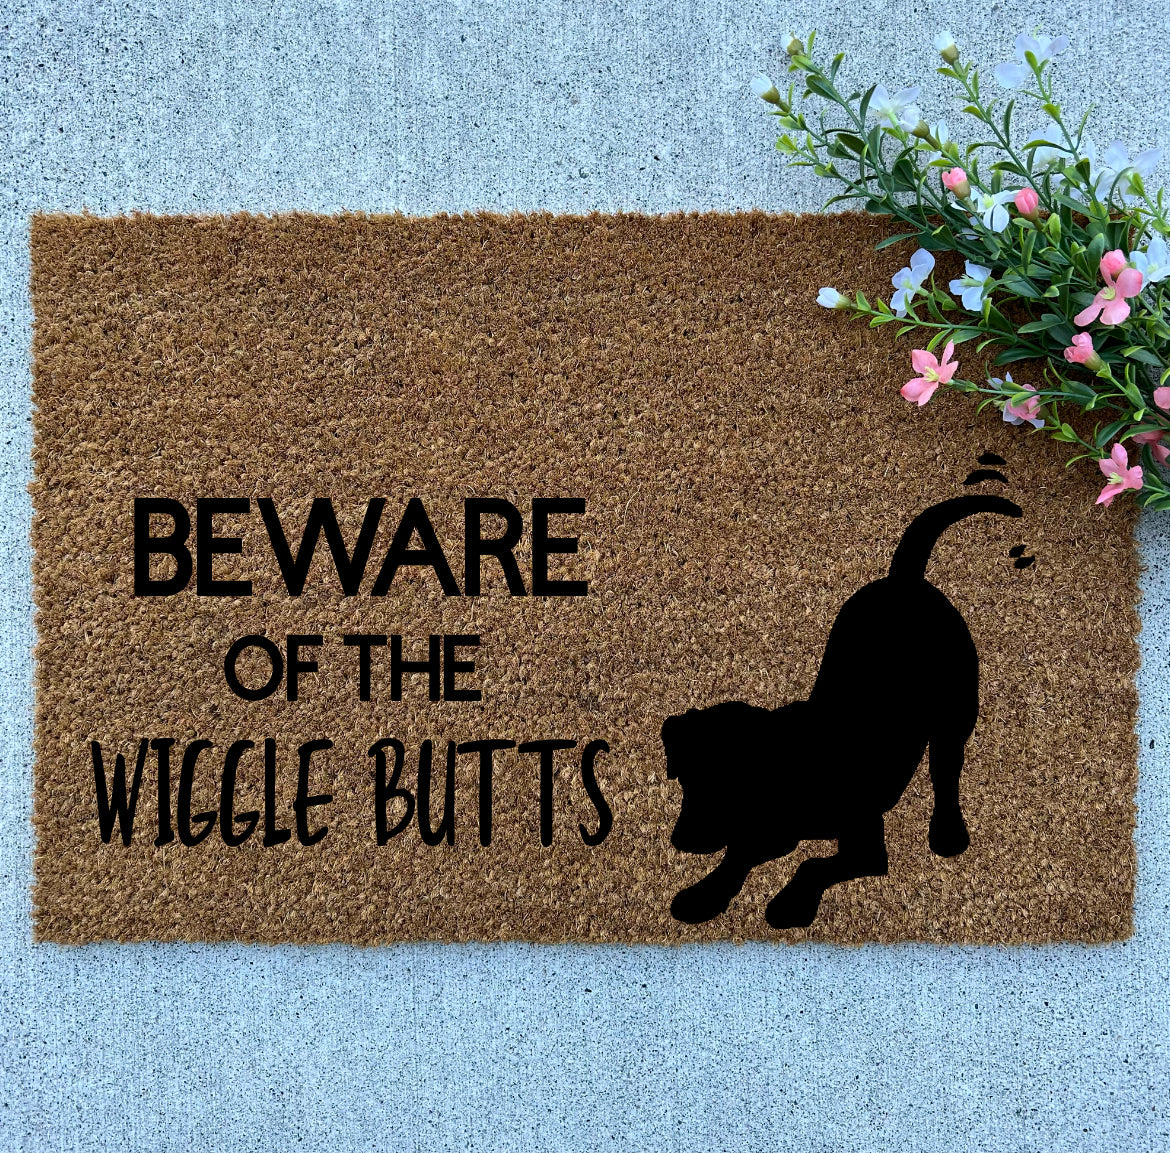 Beware of the Wiggle Butts